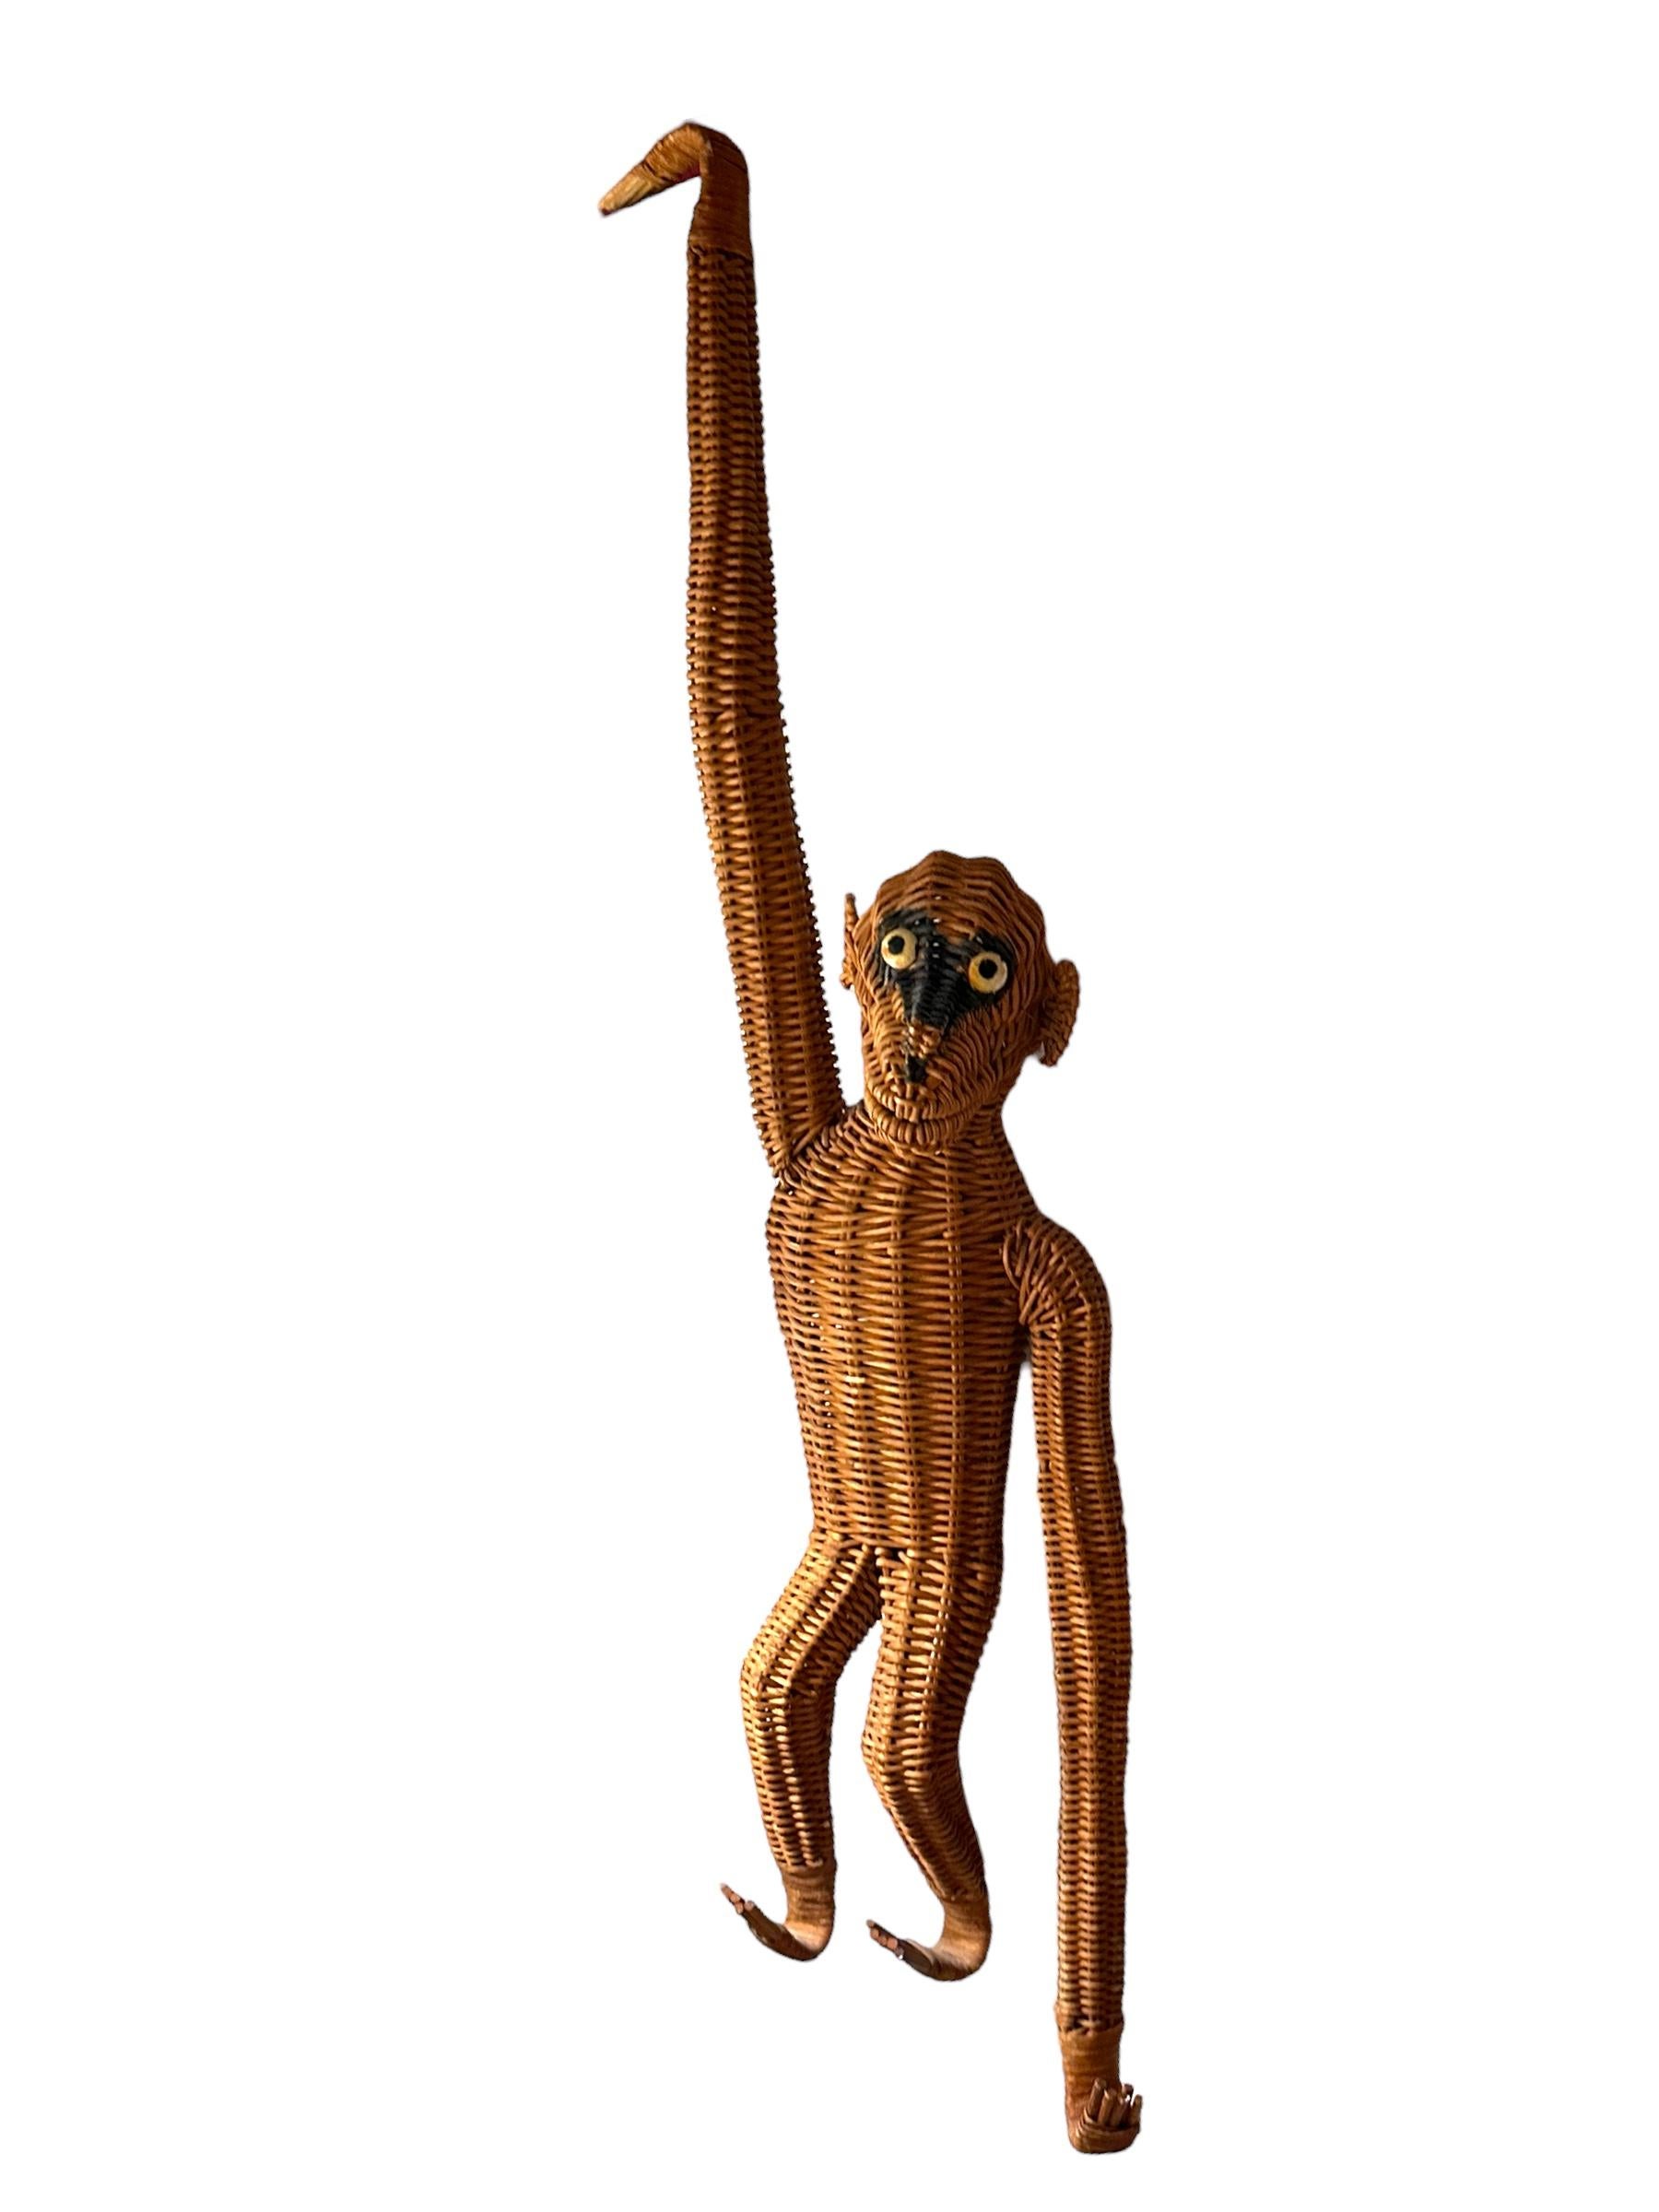 Offered is a 1970s Vintage Boho Figurative Animalia Wicker Rattan Monkey ape hanging figure in the style of Mario Lopez Torres. This French Animalia vintage 1960s-1970s woven wicker animal is in wonderful vintage condition, however it does have a